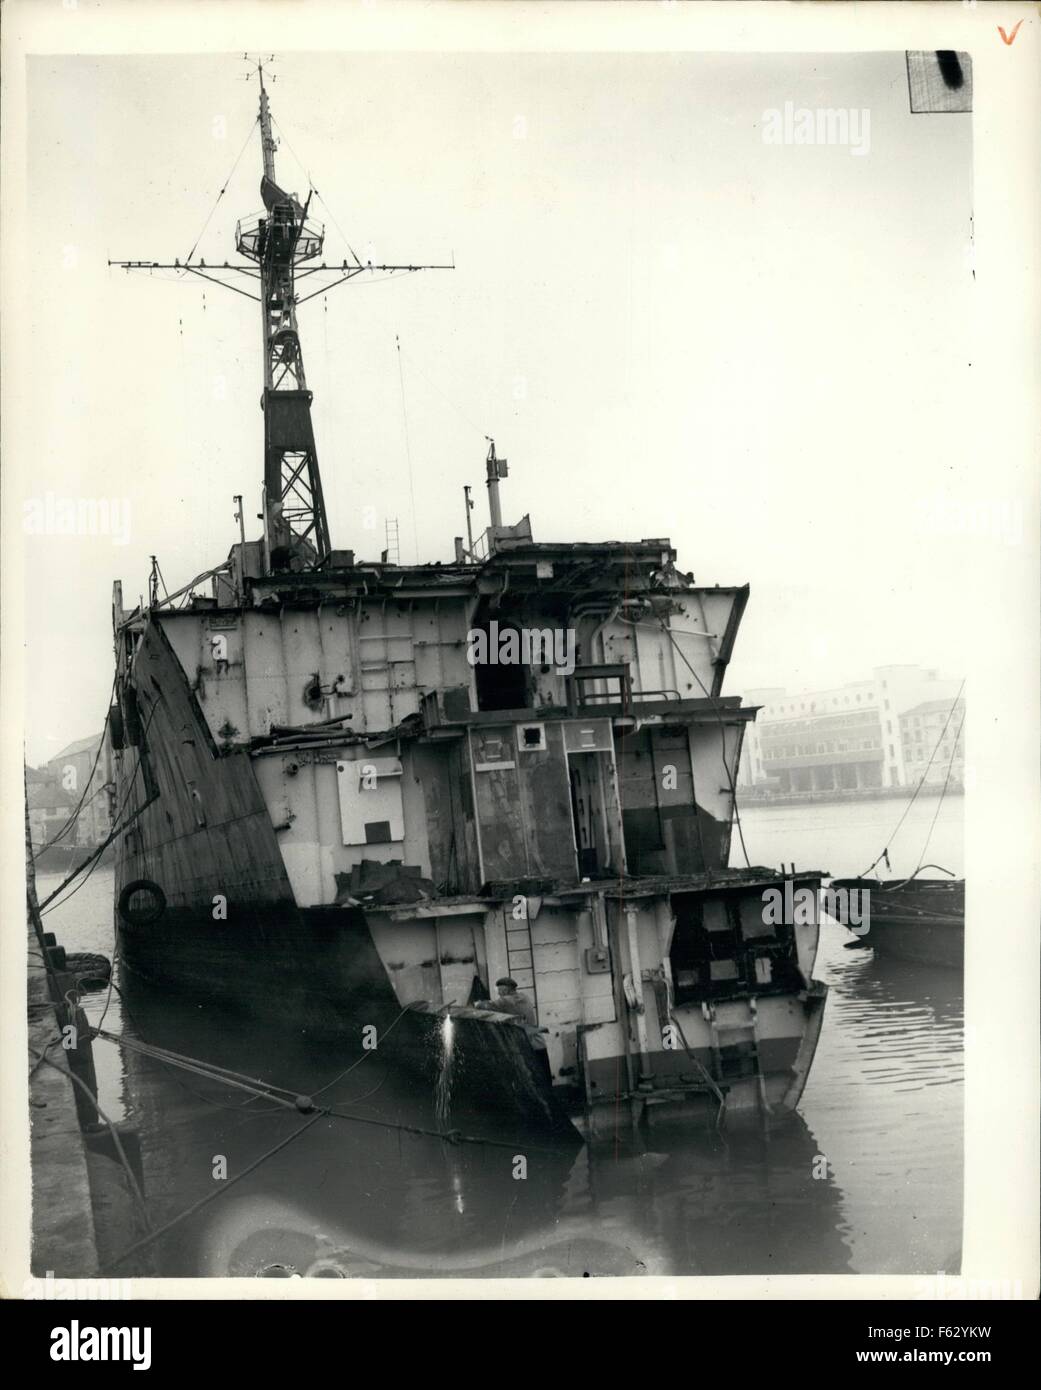 1950 - The end of a brave little ship. H.M.s. Amethyst in Breaker's yard.: One of the most famous little ships of the British navy - H.M.S. Amethyst )1,490 tons) nears an unglorious and in the breaker's Yard in Sutton Pool, Plymouth. The vessel created a sensation throughout the world when she made her amazing escape down the Yangste River away from a Communist trap in 1949. The vessel had a short reprieve recently when she was used for the filming of ''Yangste Incident''. Photo shows the bows of H.M.S. Amethyst are cut away - at the breakers' Yard at Sutton Pool, Plymouth. (Credit Image: © Ke Stock Photo